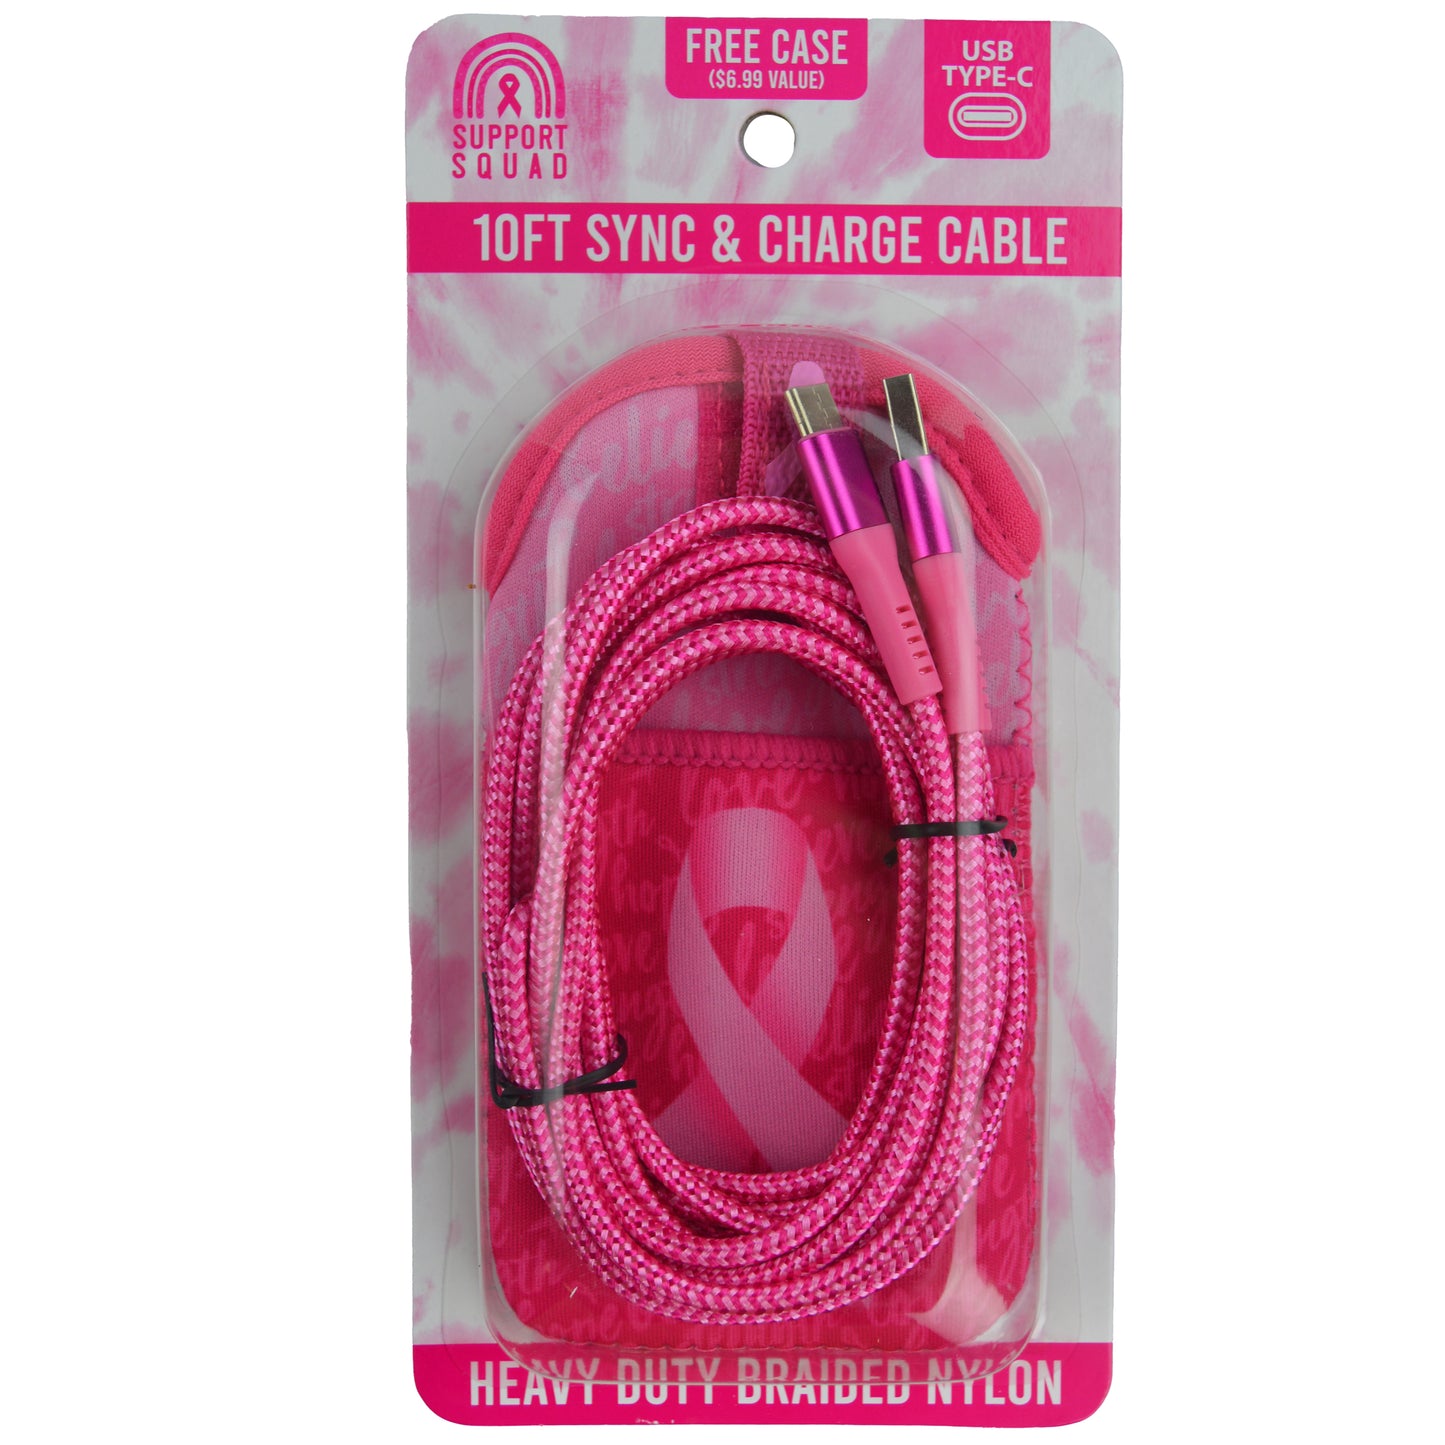 ITEM NUMBER 023439L PINK 10FT CABLE TYPE C - STORE SURPLUS NO DISPLAY 3 PIECES PER PACK